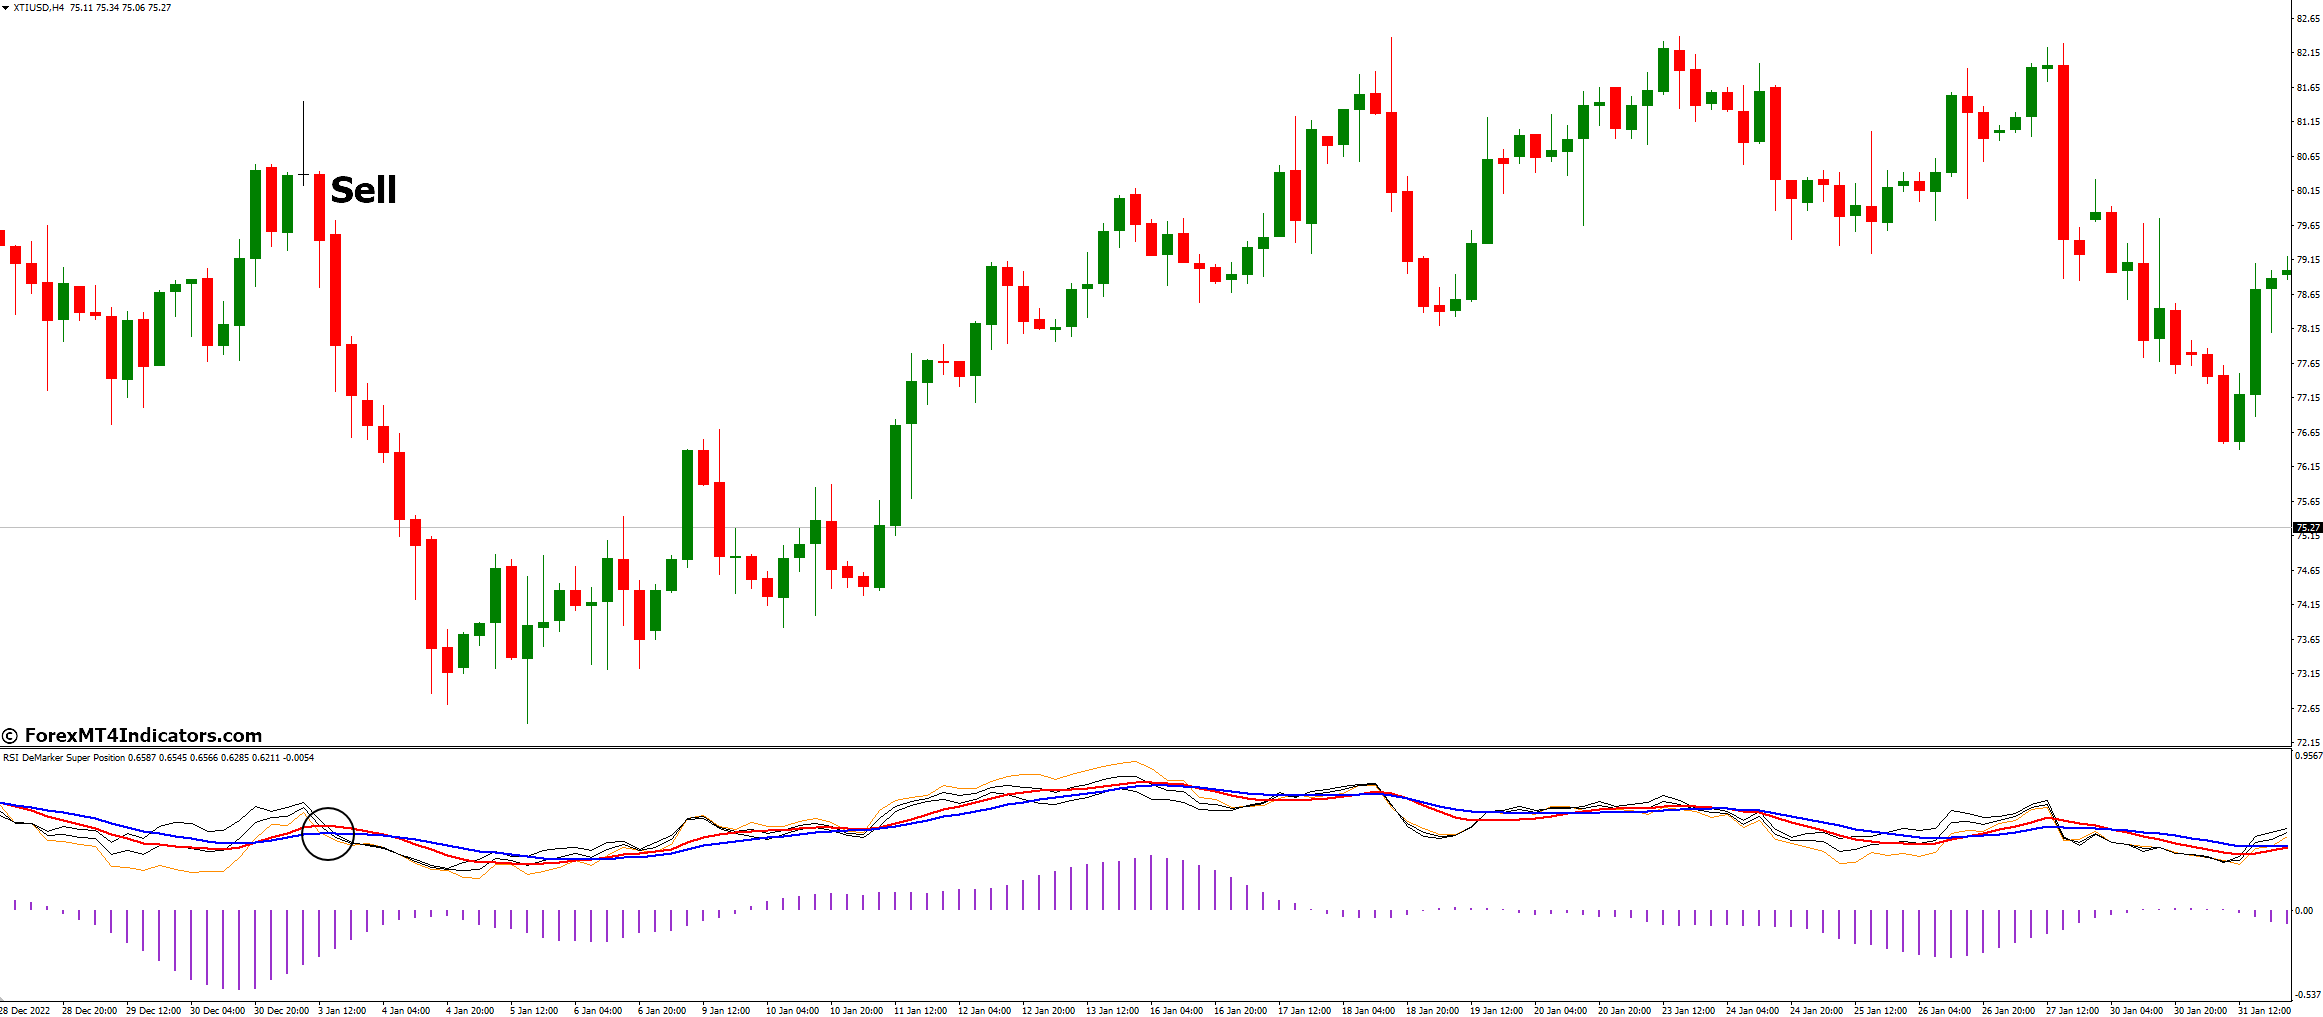 How to Trade with RSI DeMarker Super Position Indicator - Sell Entry